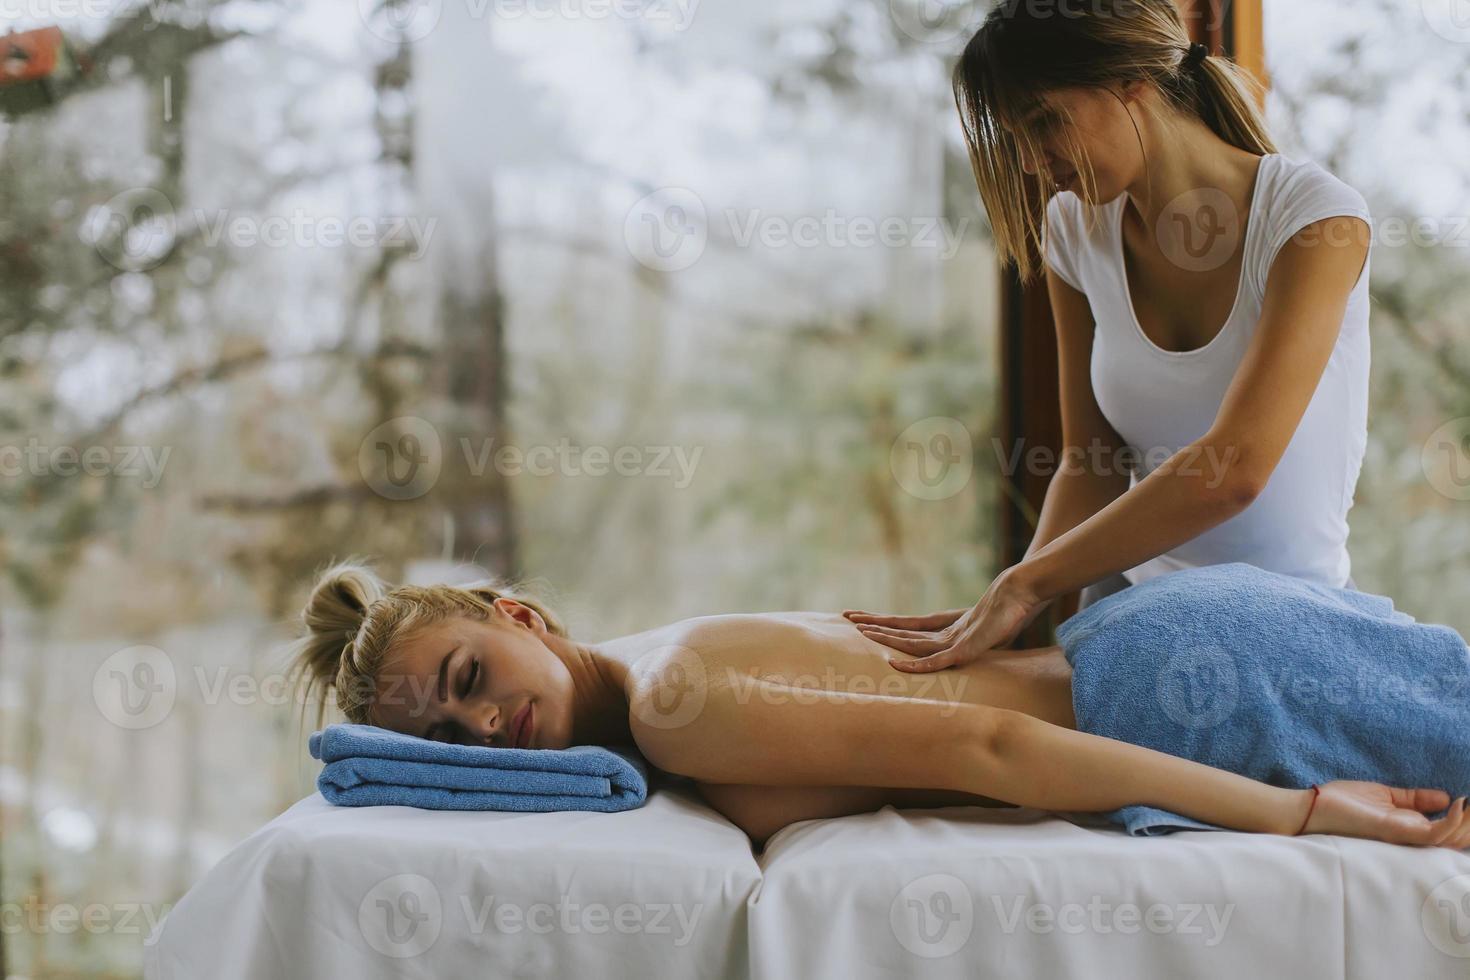 Beautiful young woman lying and having back massage in spa salon during winter season photo